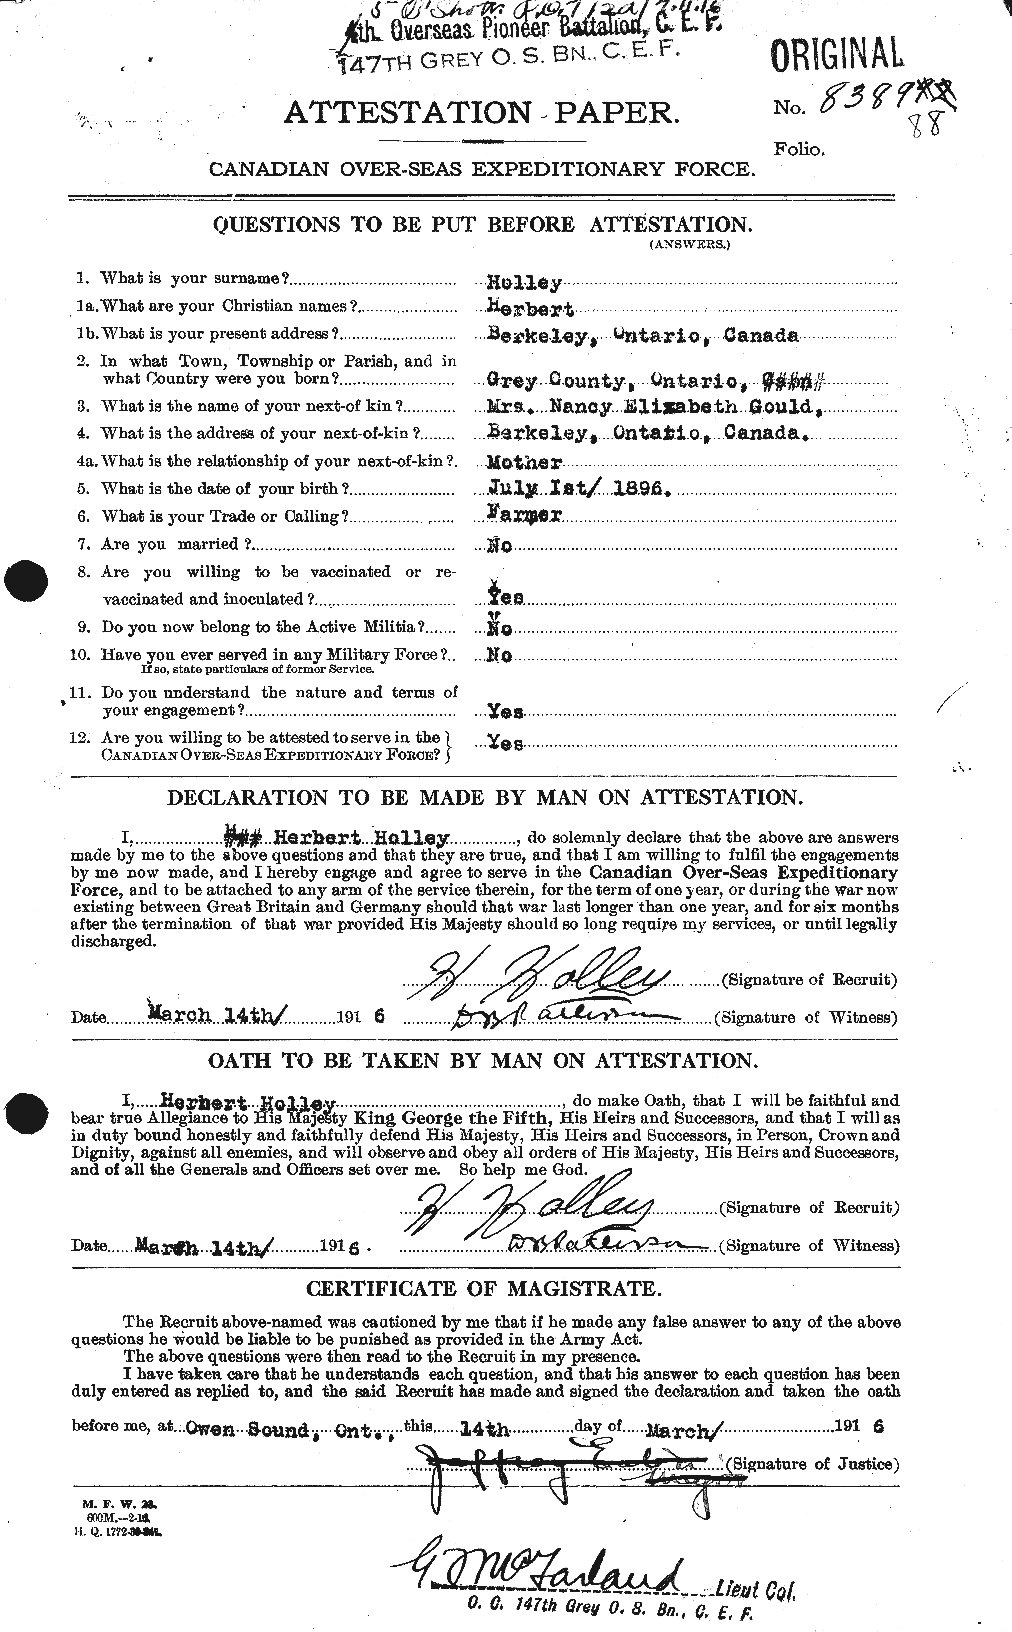 Personnel Records of the First World War - CEF 396335a